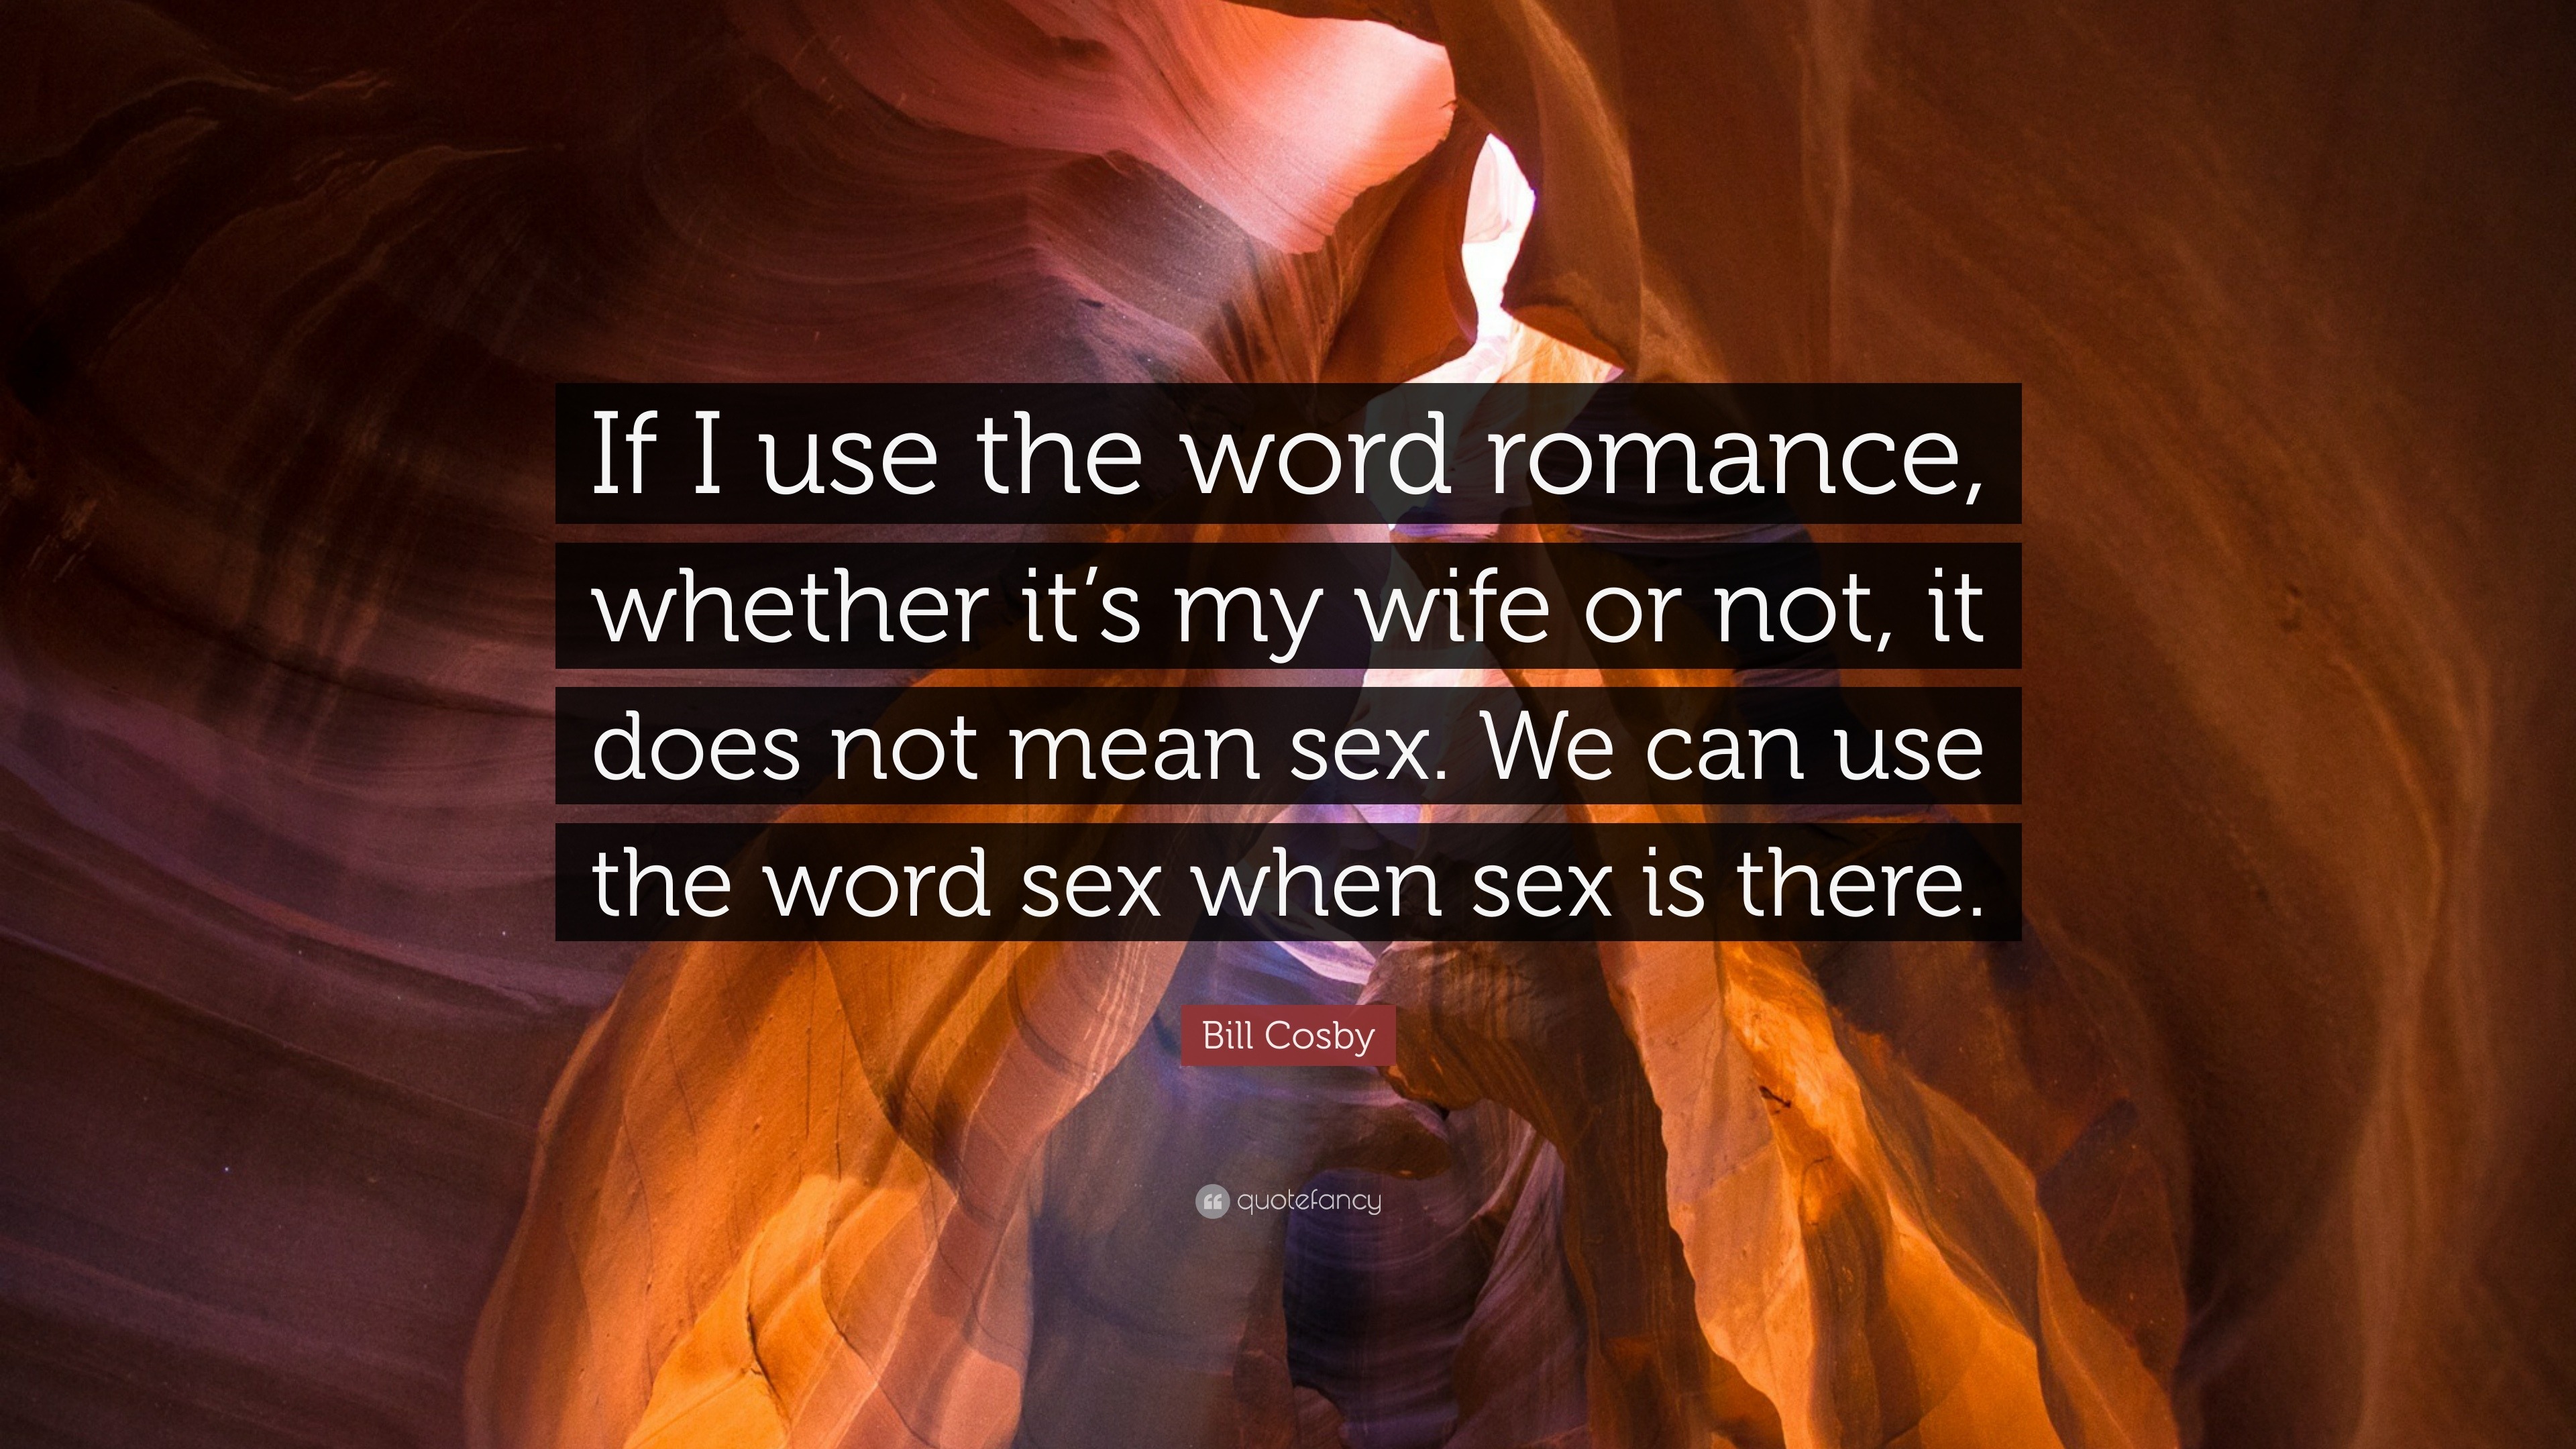 Bill Cosby Quote “if I Use The Word Romance Whether Its My Wife Or Not It Does Not Mean Sex 2504